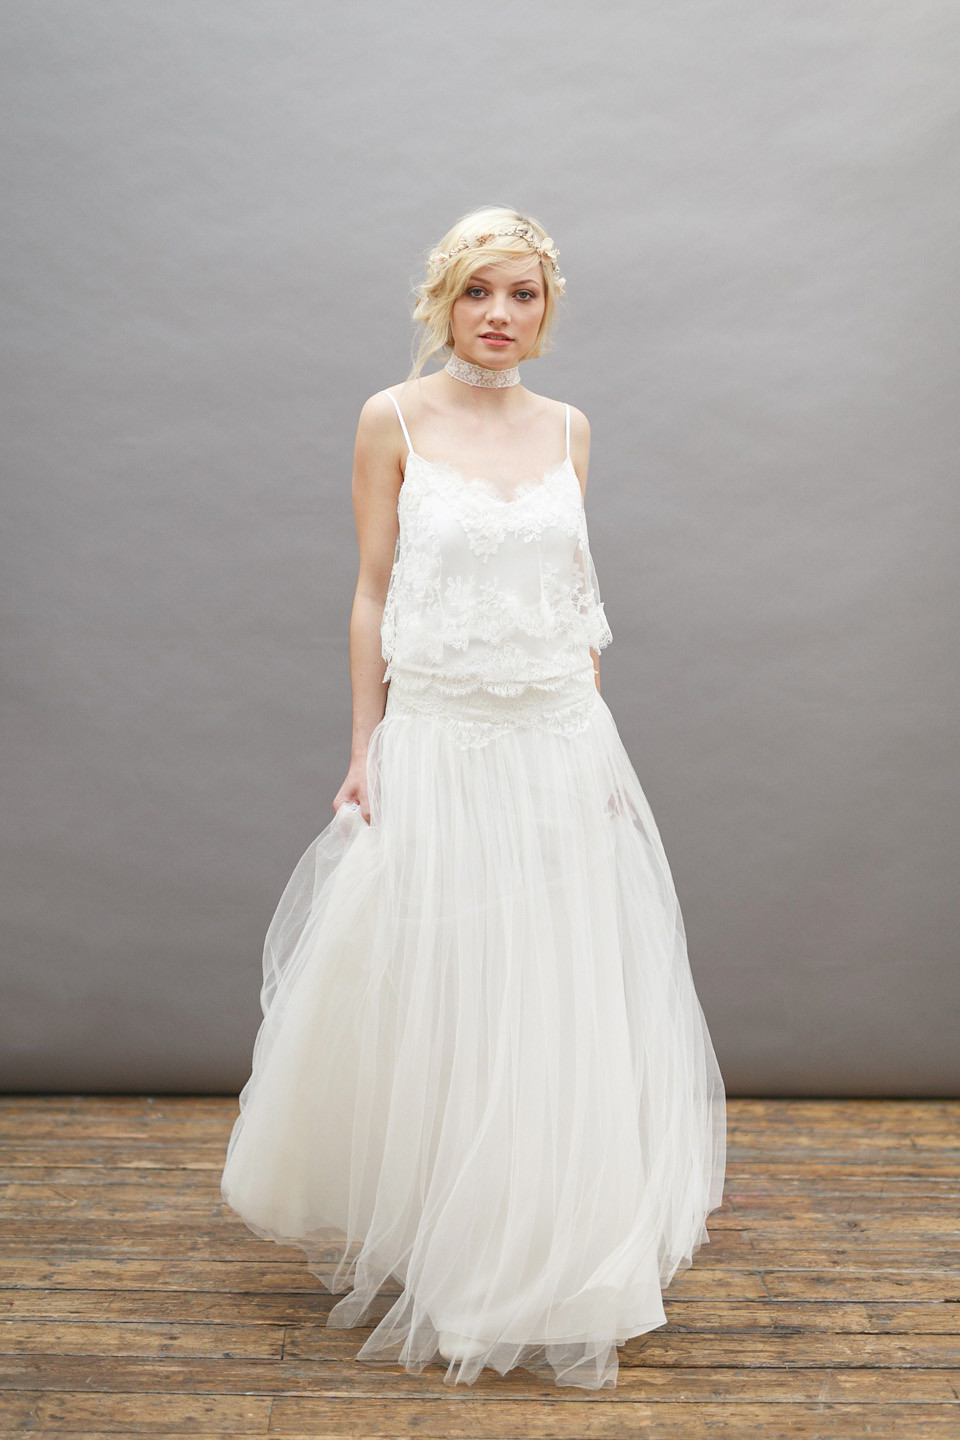 Ethereal Wedding Gowns
 Dana Bolton – Beautiful Bohemian and Elegantly Ethereal